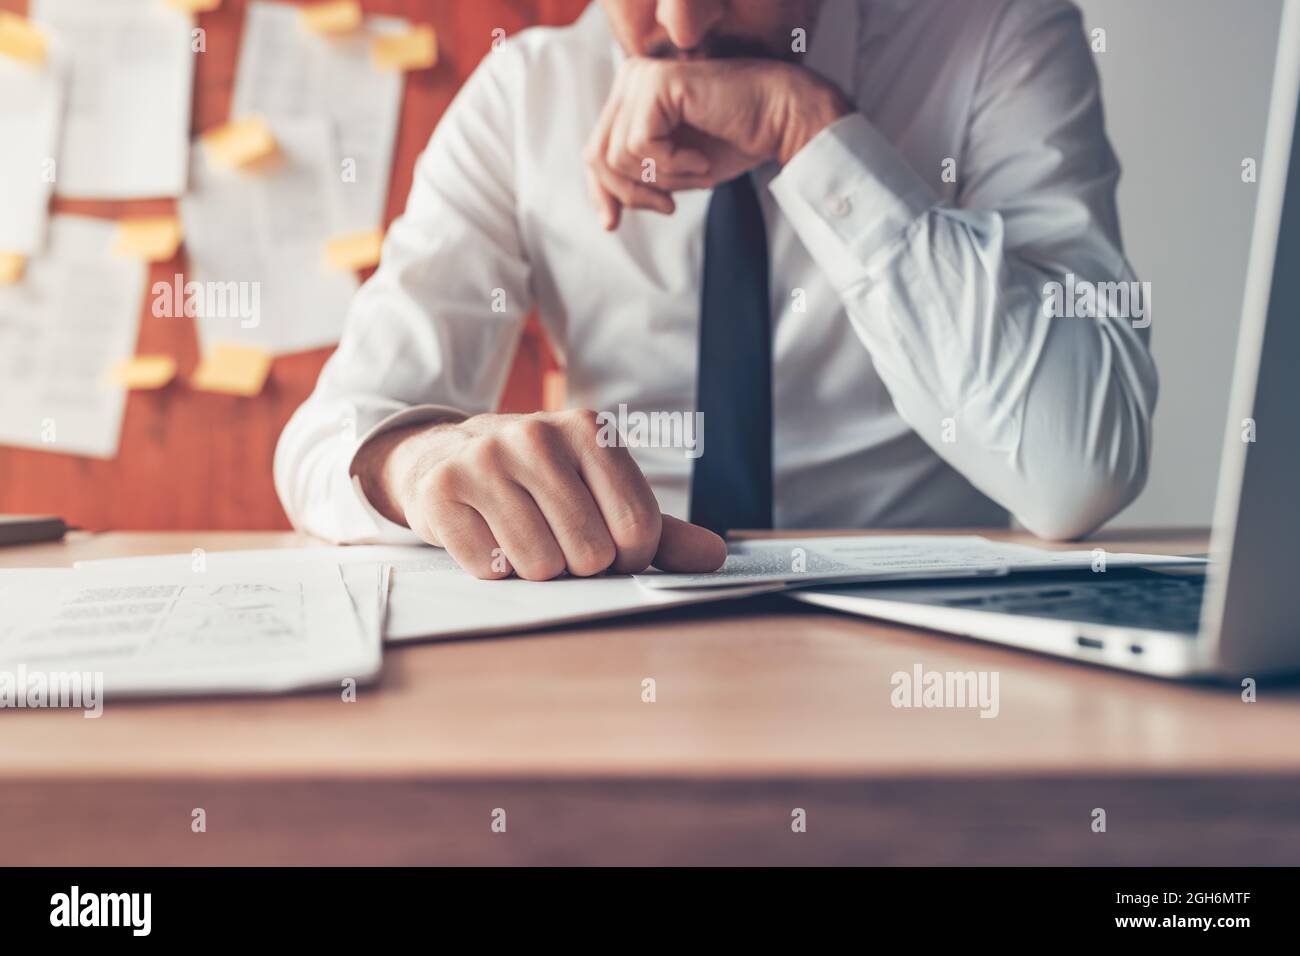 Worried businessman reading business report document at office desk, close up with selective focus Stock Photo